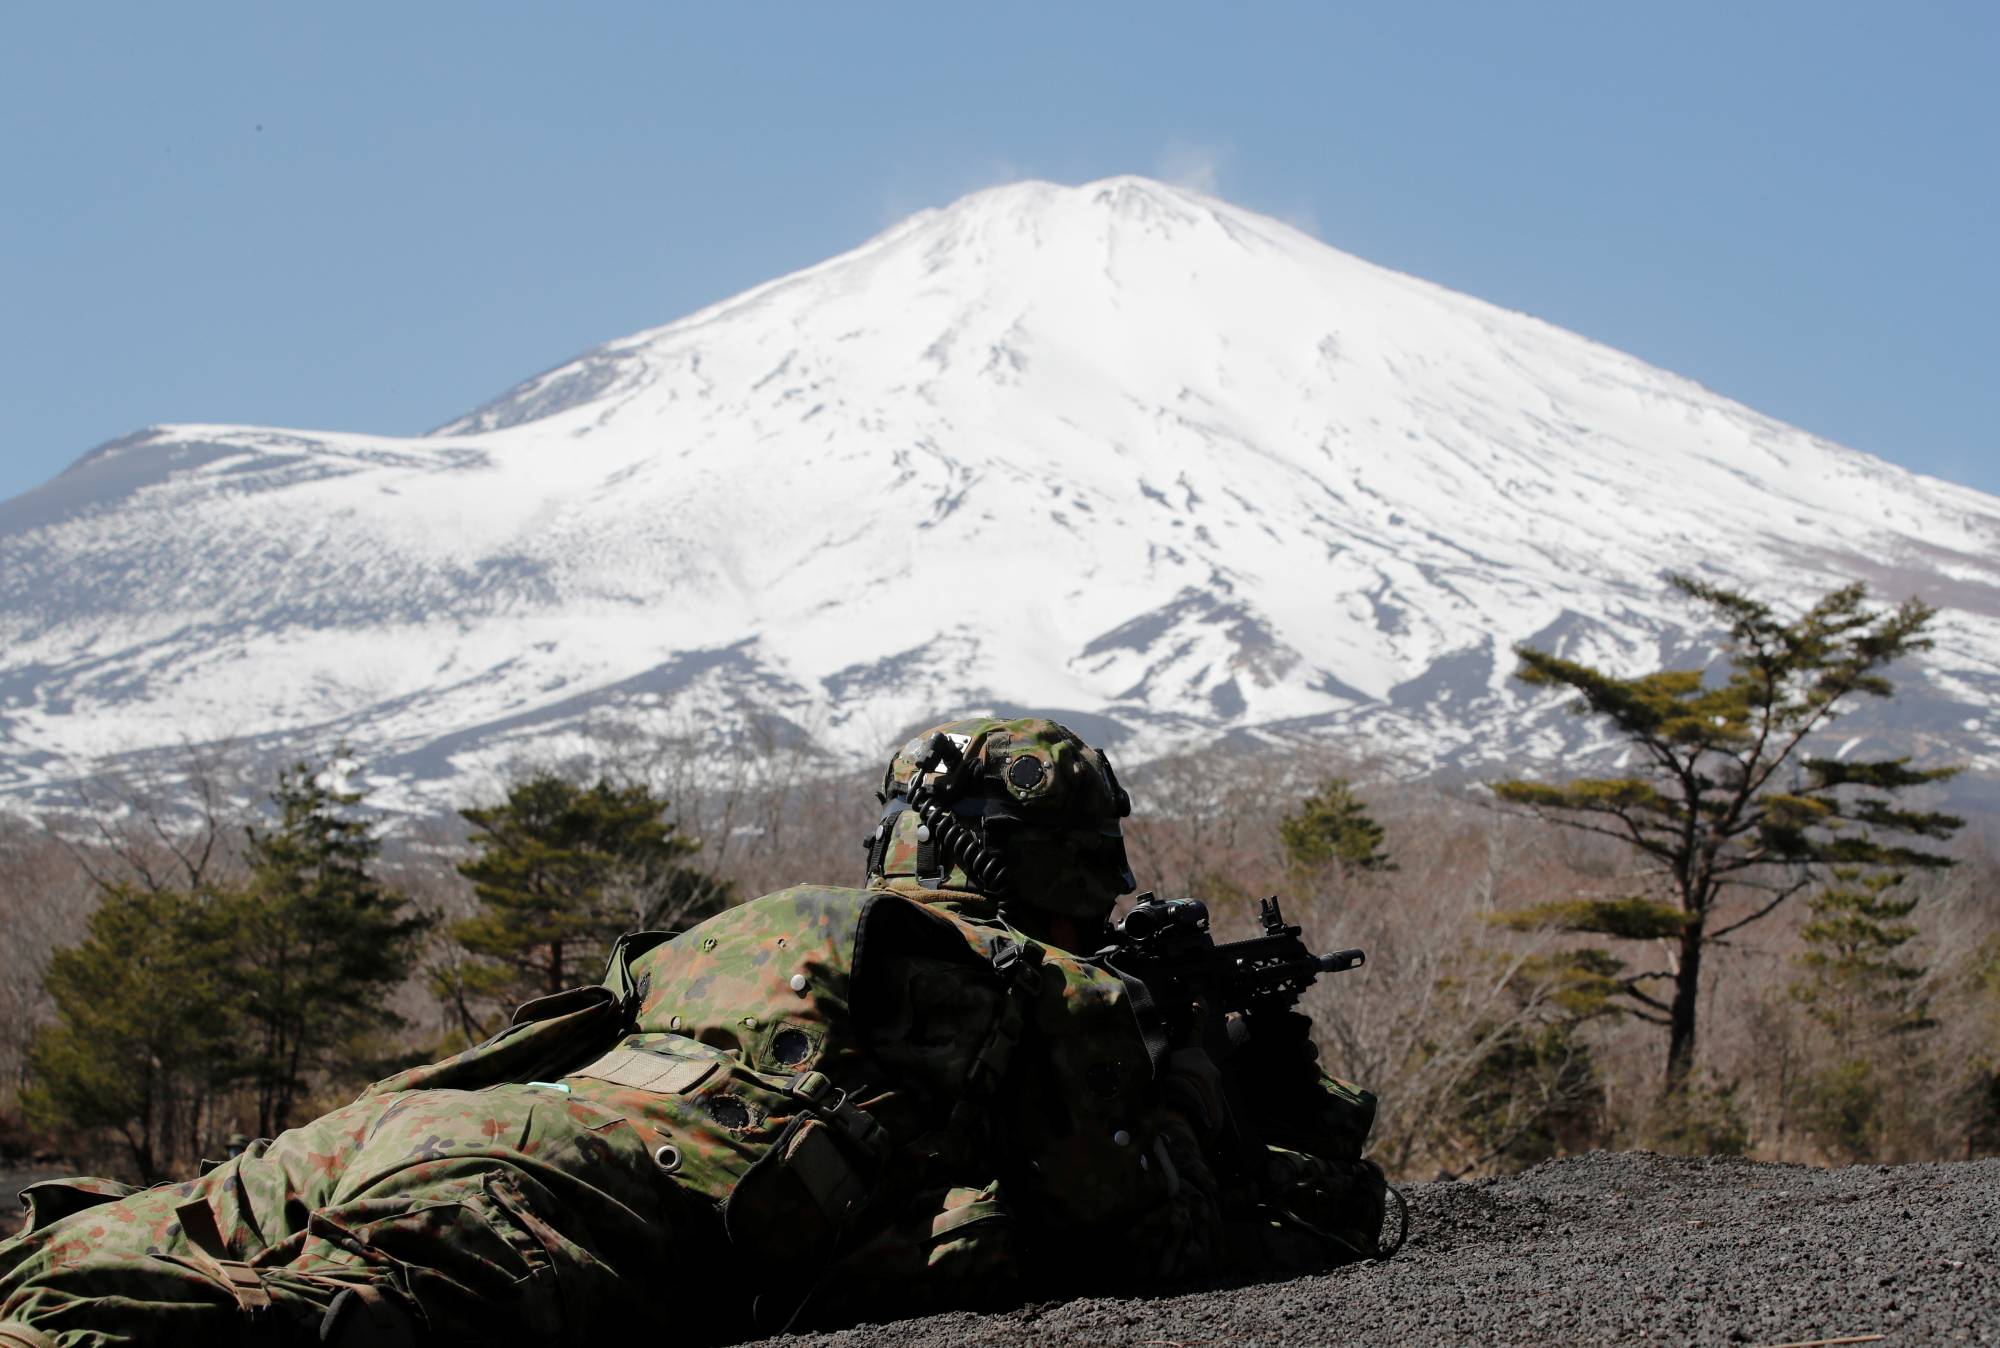 A member of the Self-Defense Force’s Amphibious Rapid Deployment Brigade takes a position as Mount Fuji stands in the background during joint exercises with the U.S. Marine Corps in Gotemba, Shizuoka Prefecture, on March 15. | REUTERS